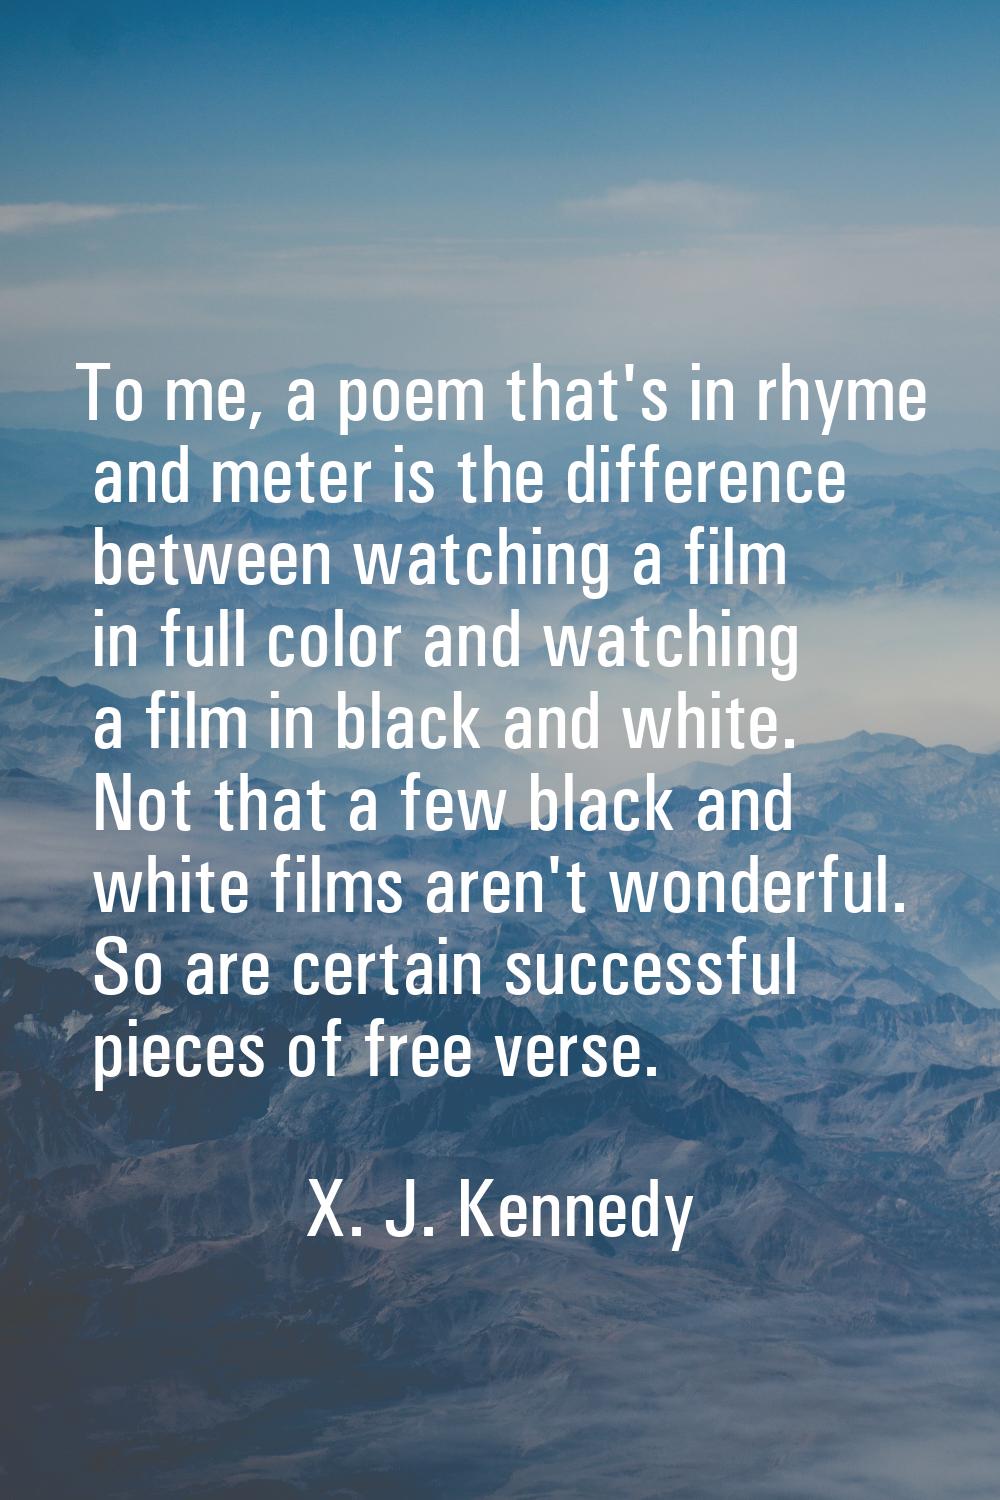 To me, a poem that's in rhyme and meter is the difference between watching a film in full color and